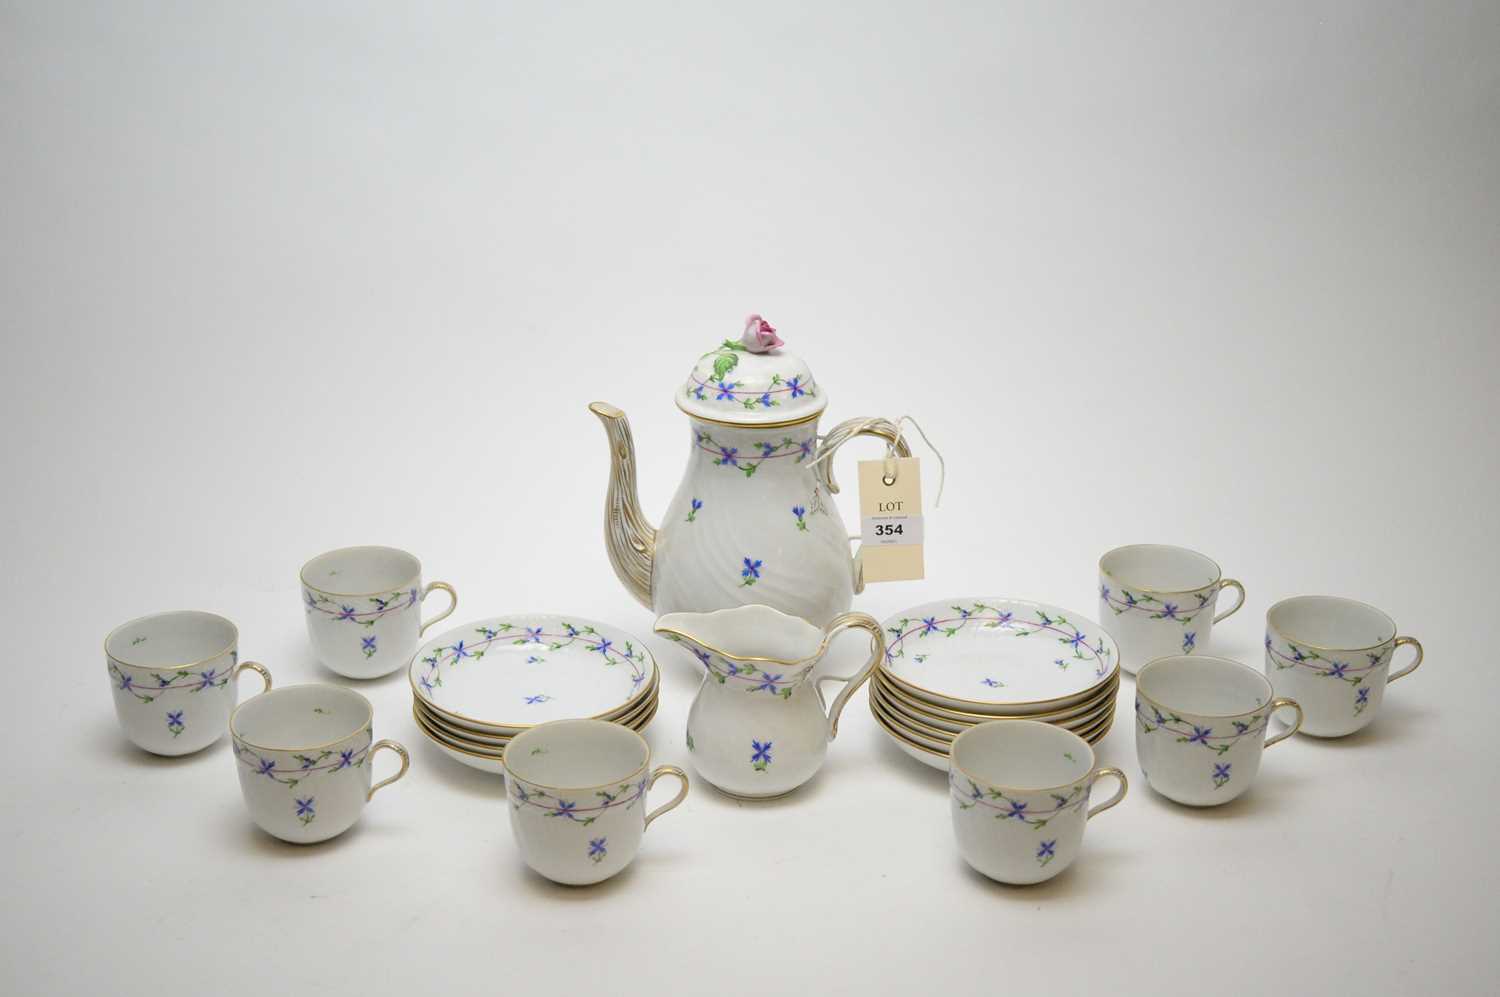 Lot 354 - Herend, Hungary: a coffee service.